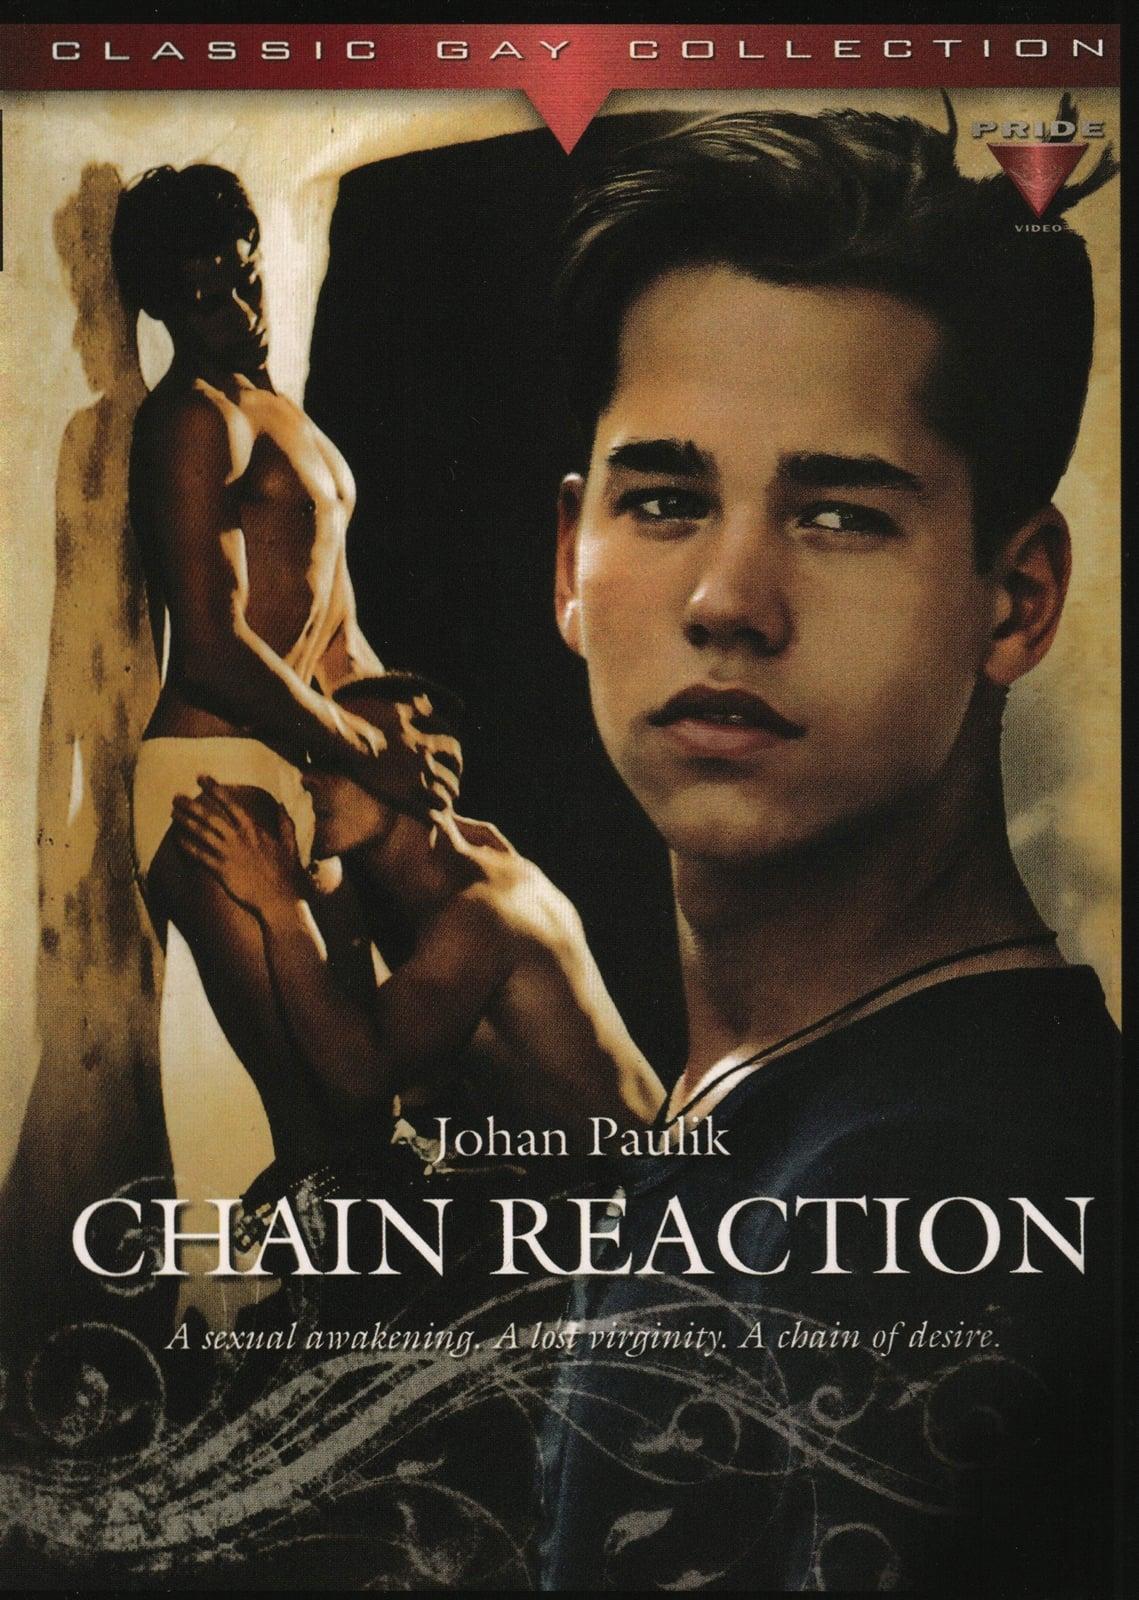 The Chain Reaction poster